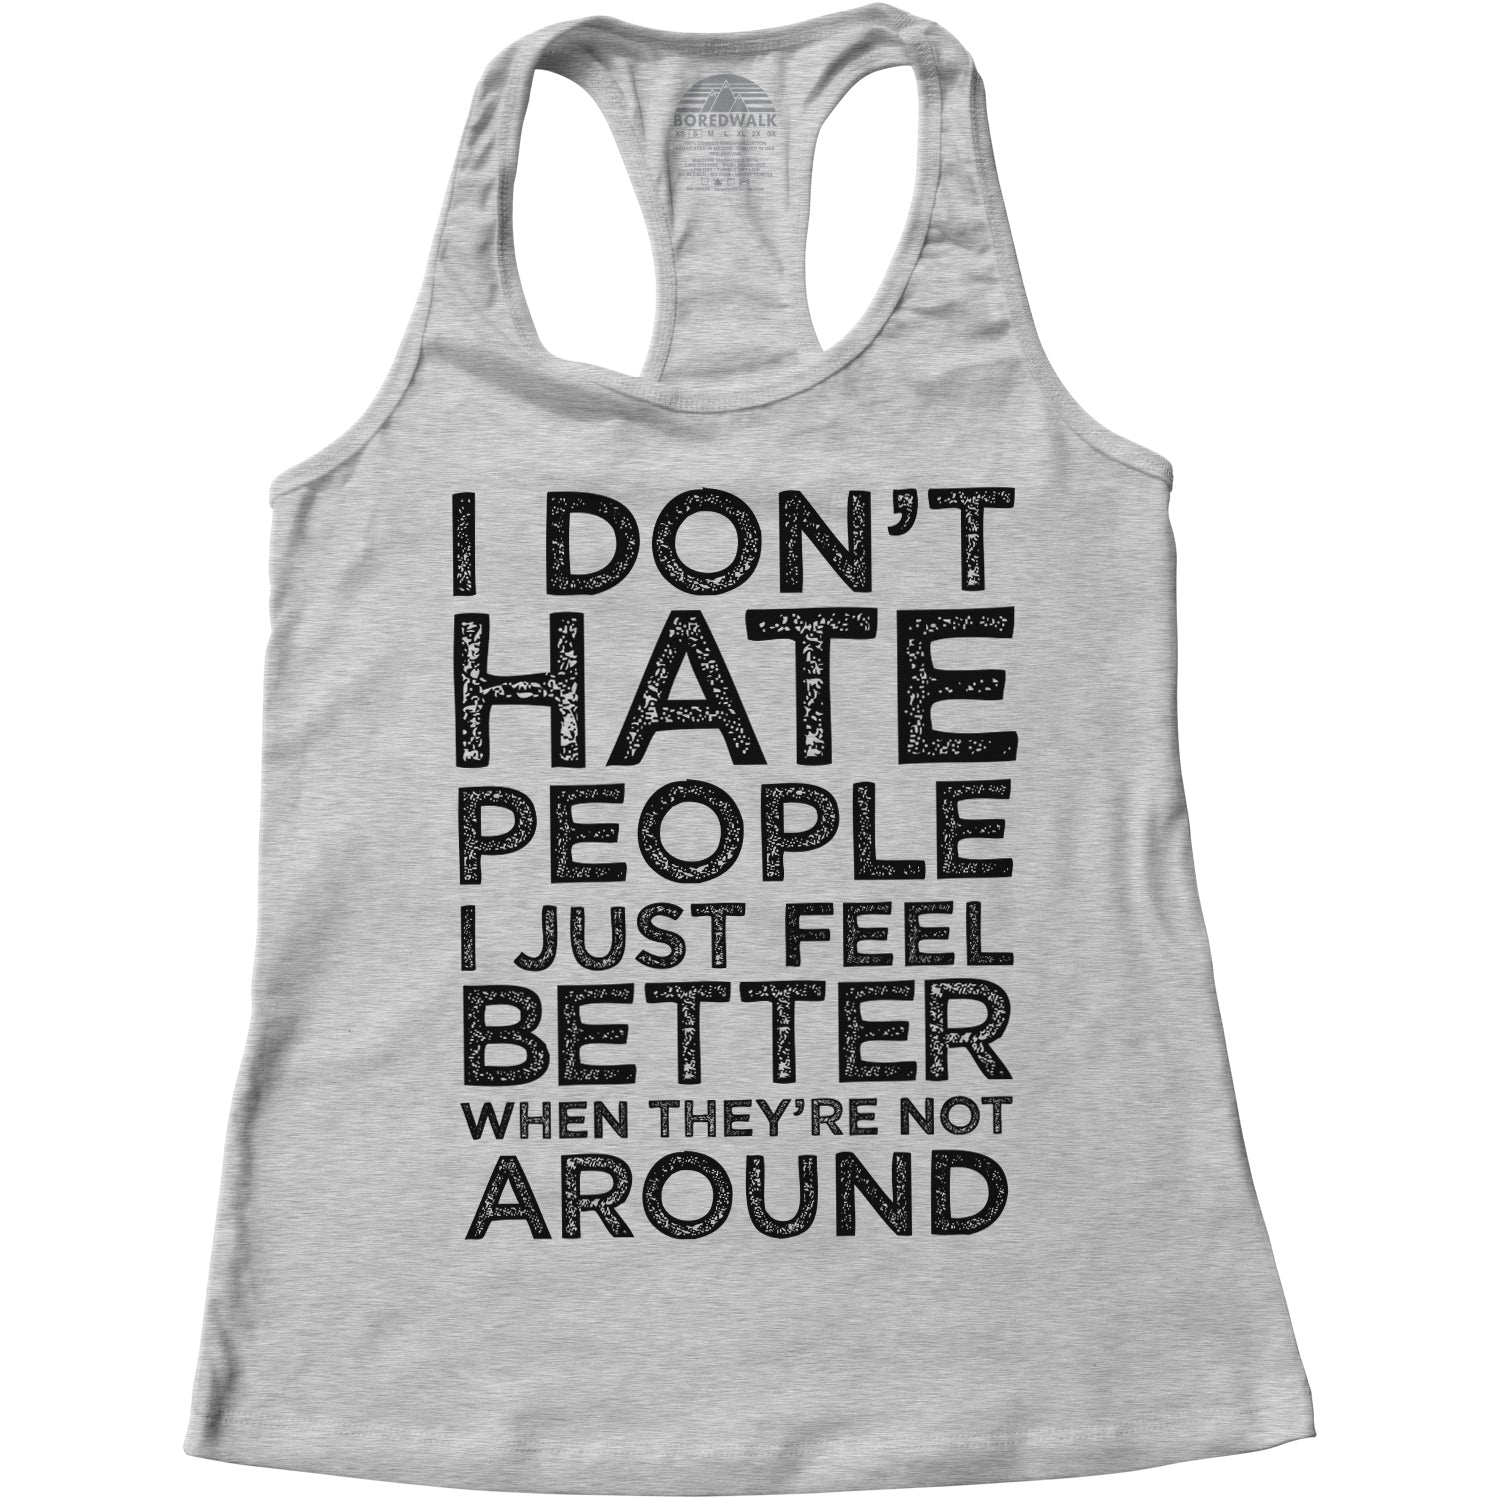 Women's I Don't Hate People I Just Feel Better When They're Not Around Racerback Tank Top